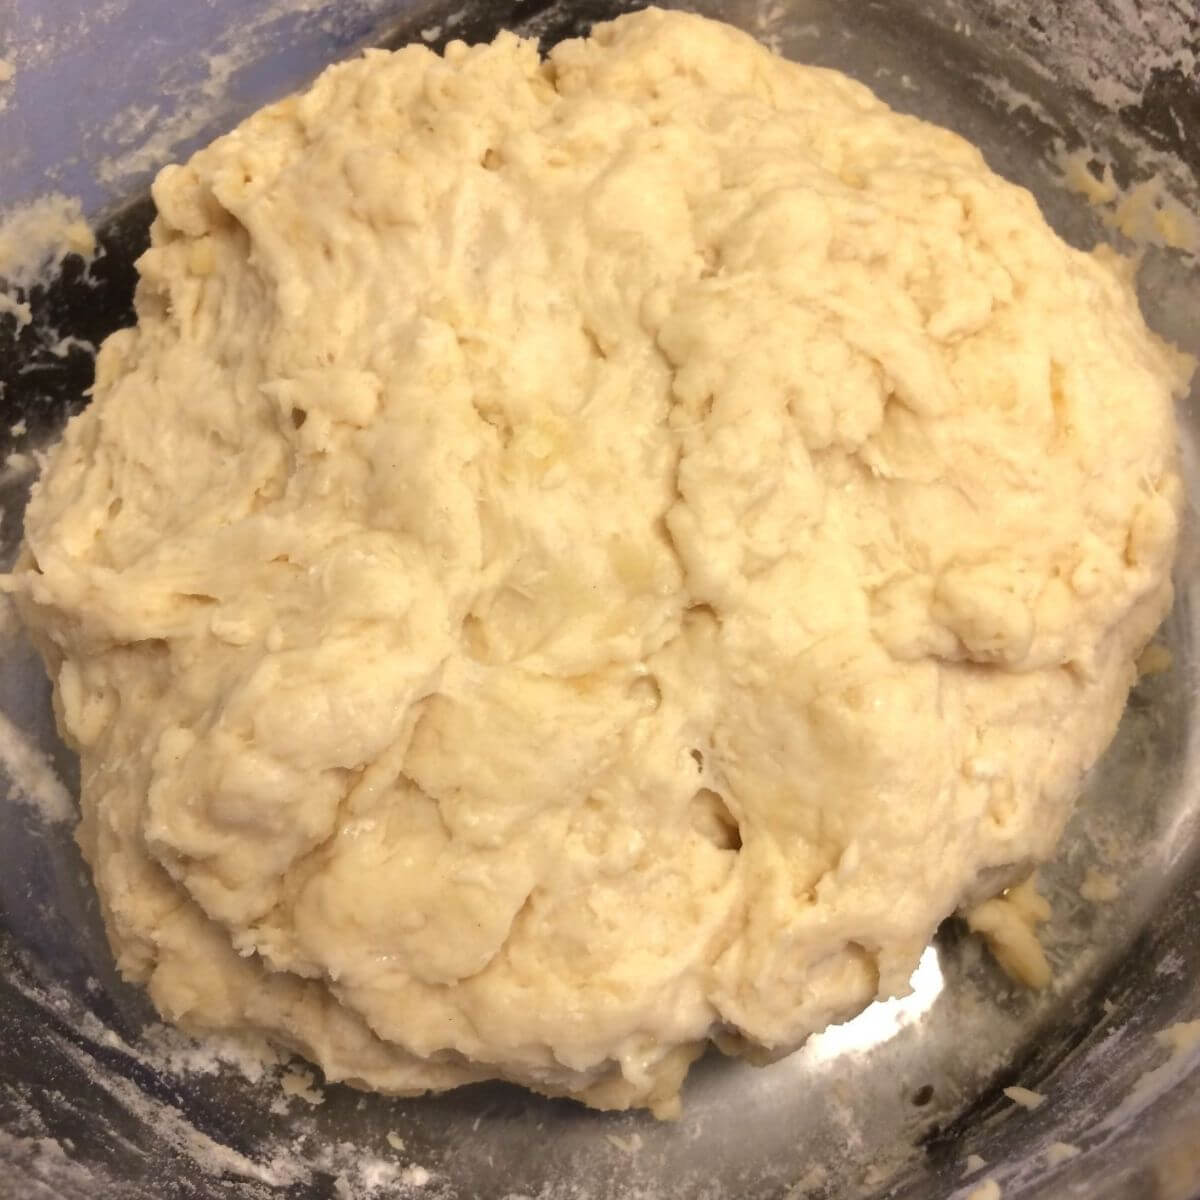 Raw dough combined into a ball, still pretty sticky and placed in glass bowl.